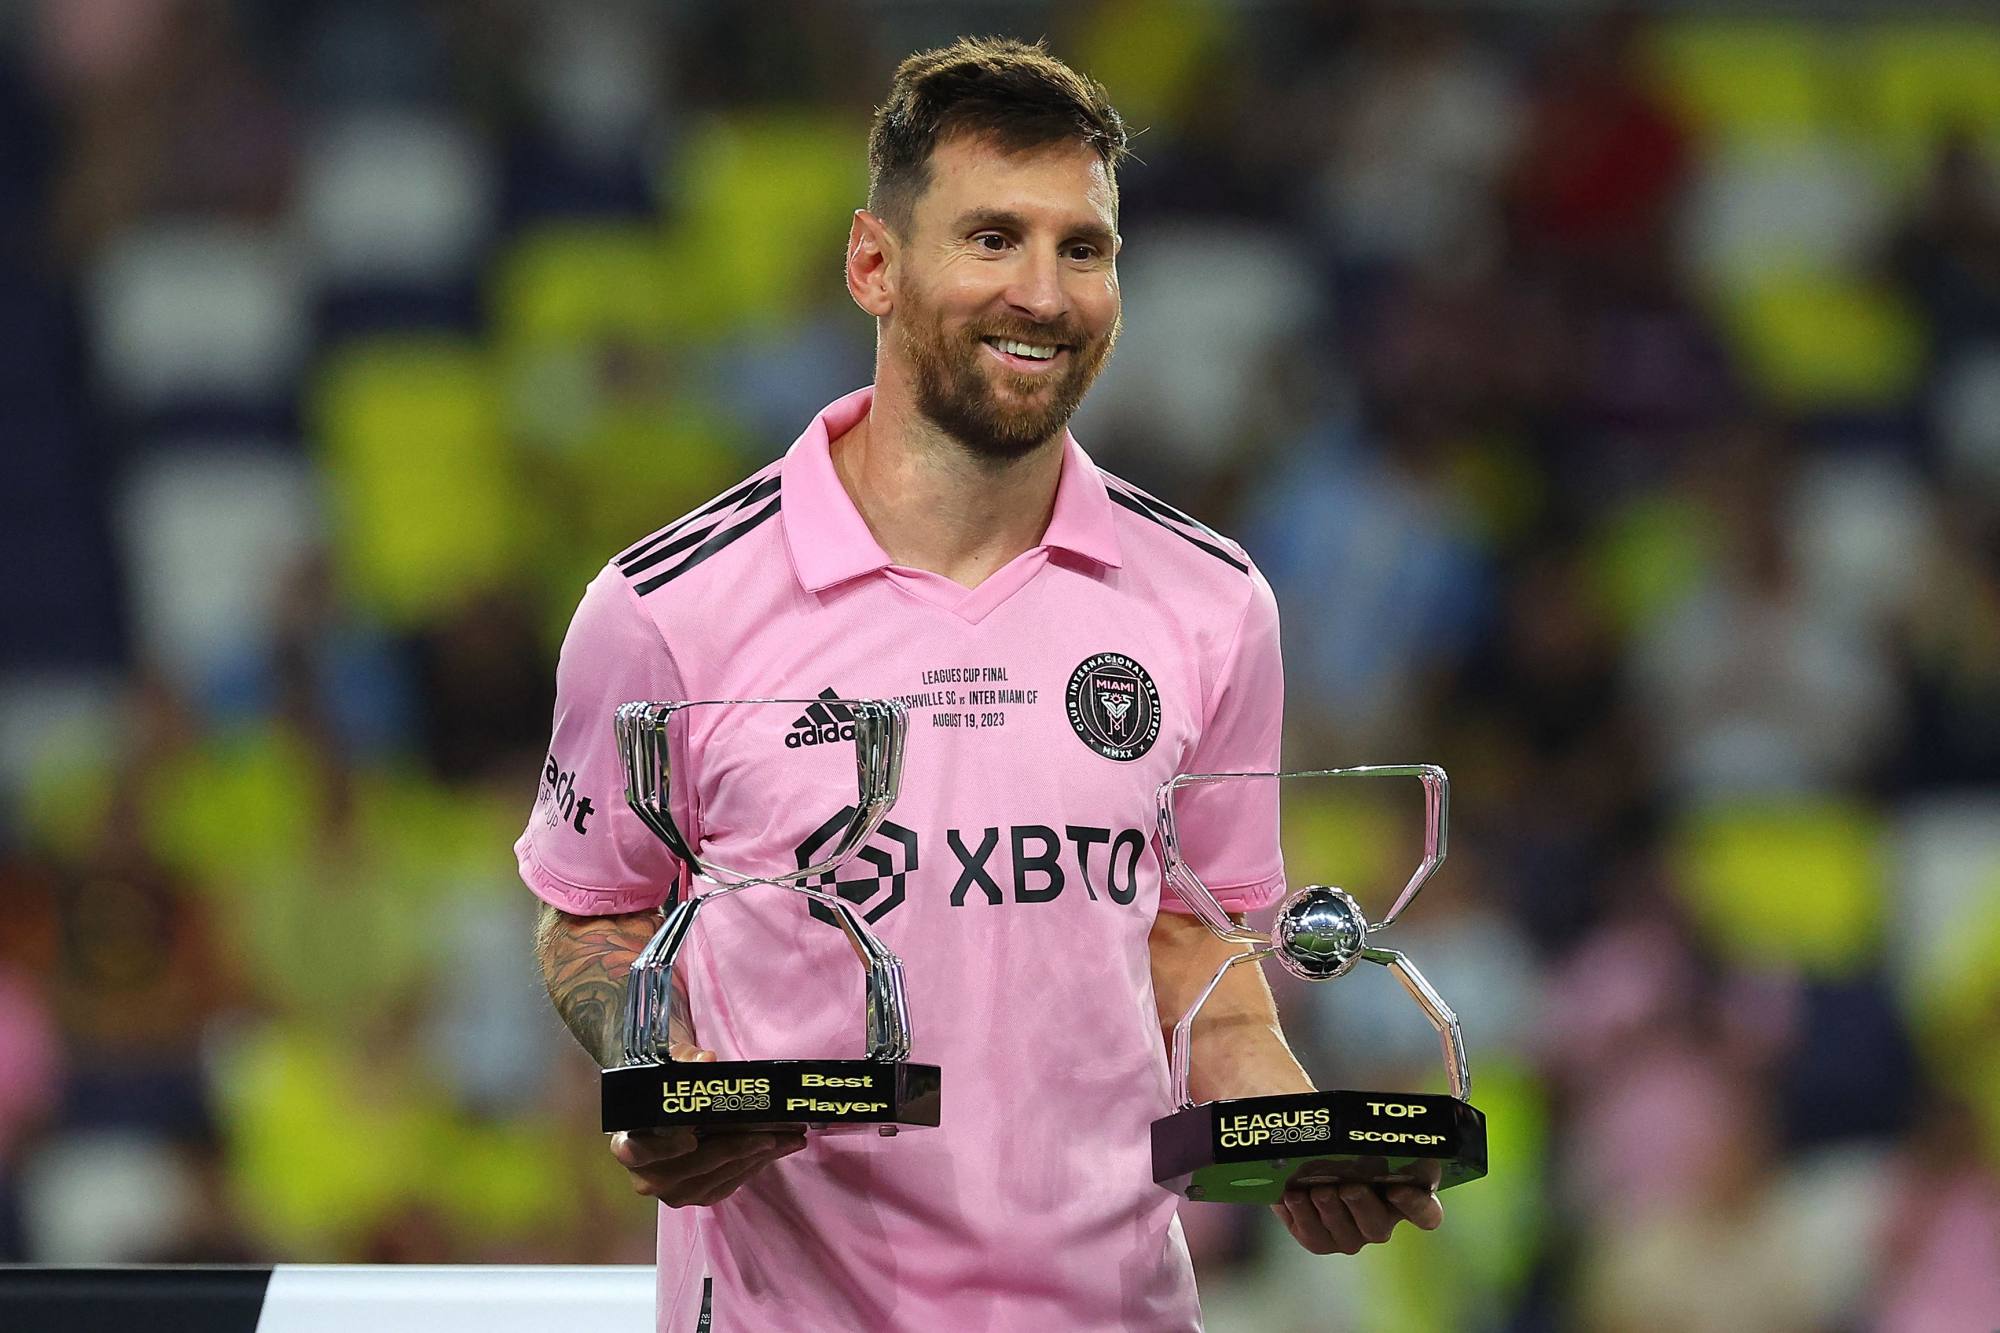 Lionel Messi leads MLS side Inter Miami to Leagues Cup win against